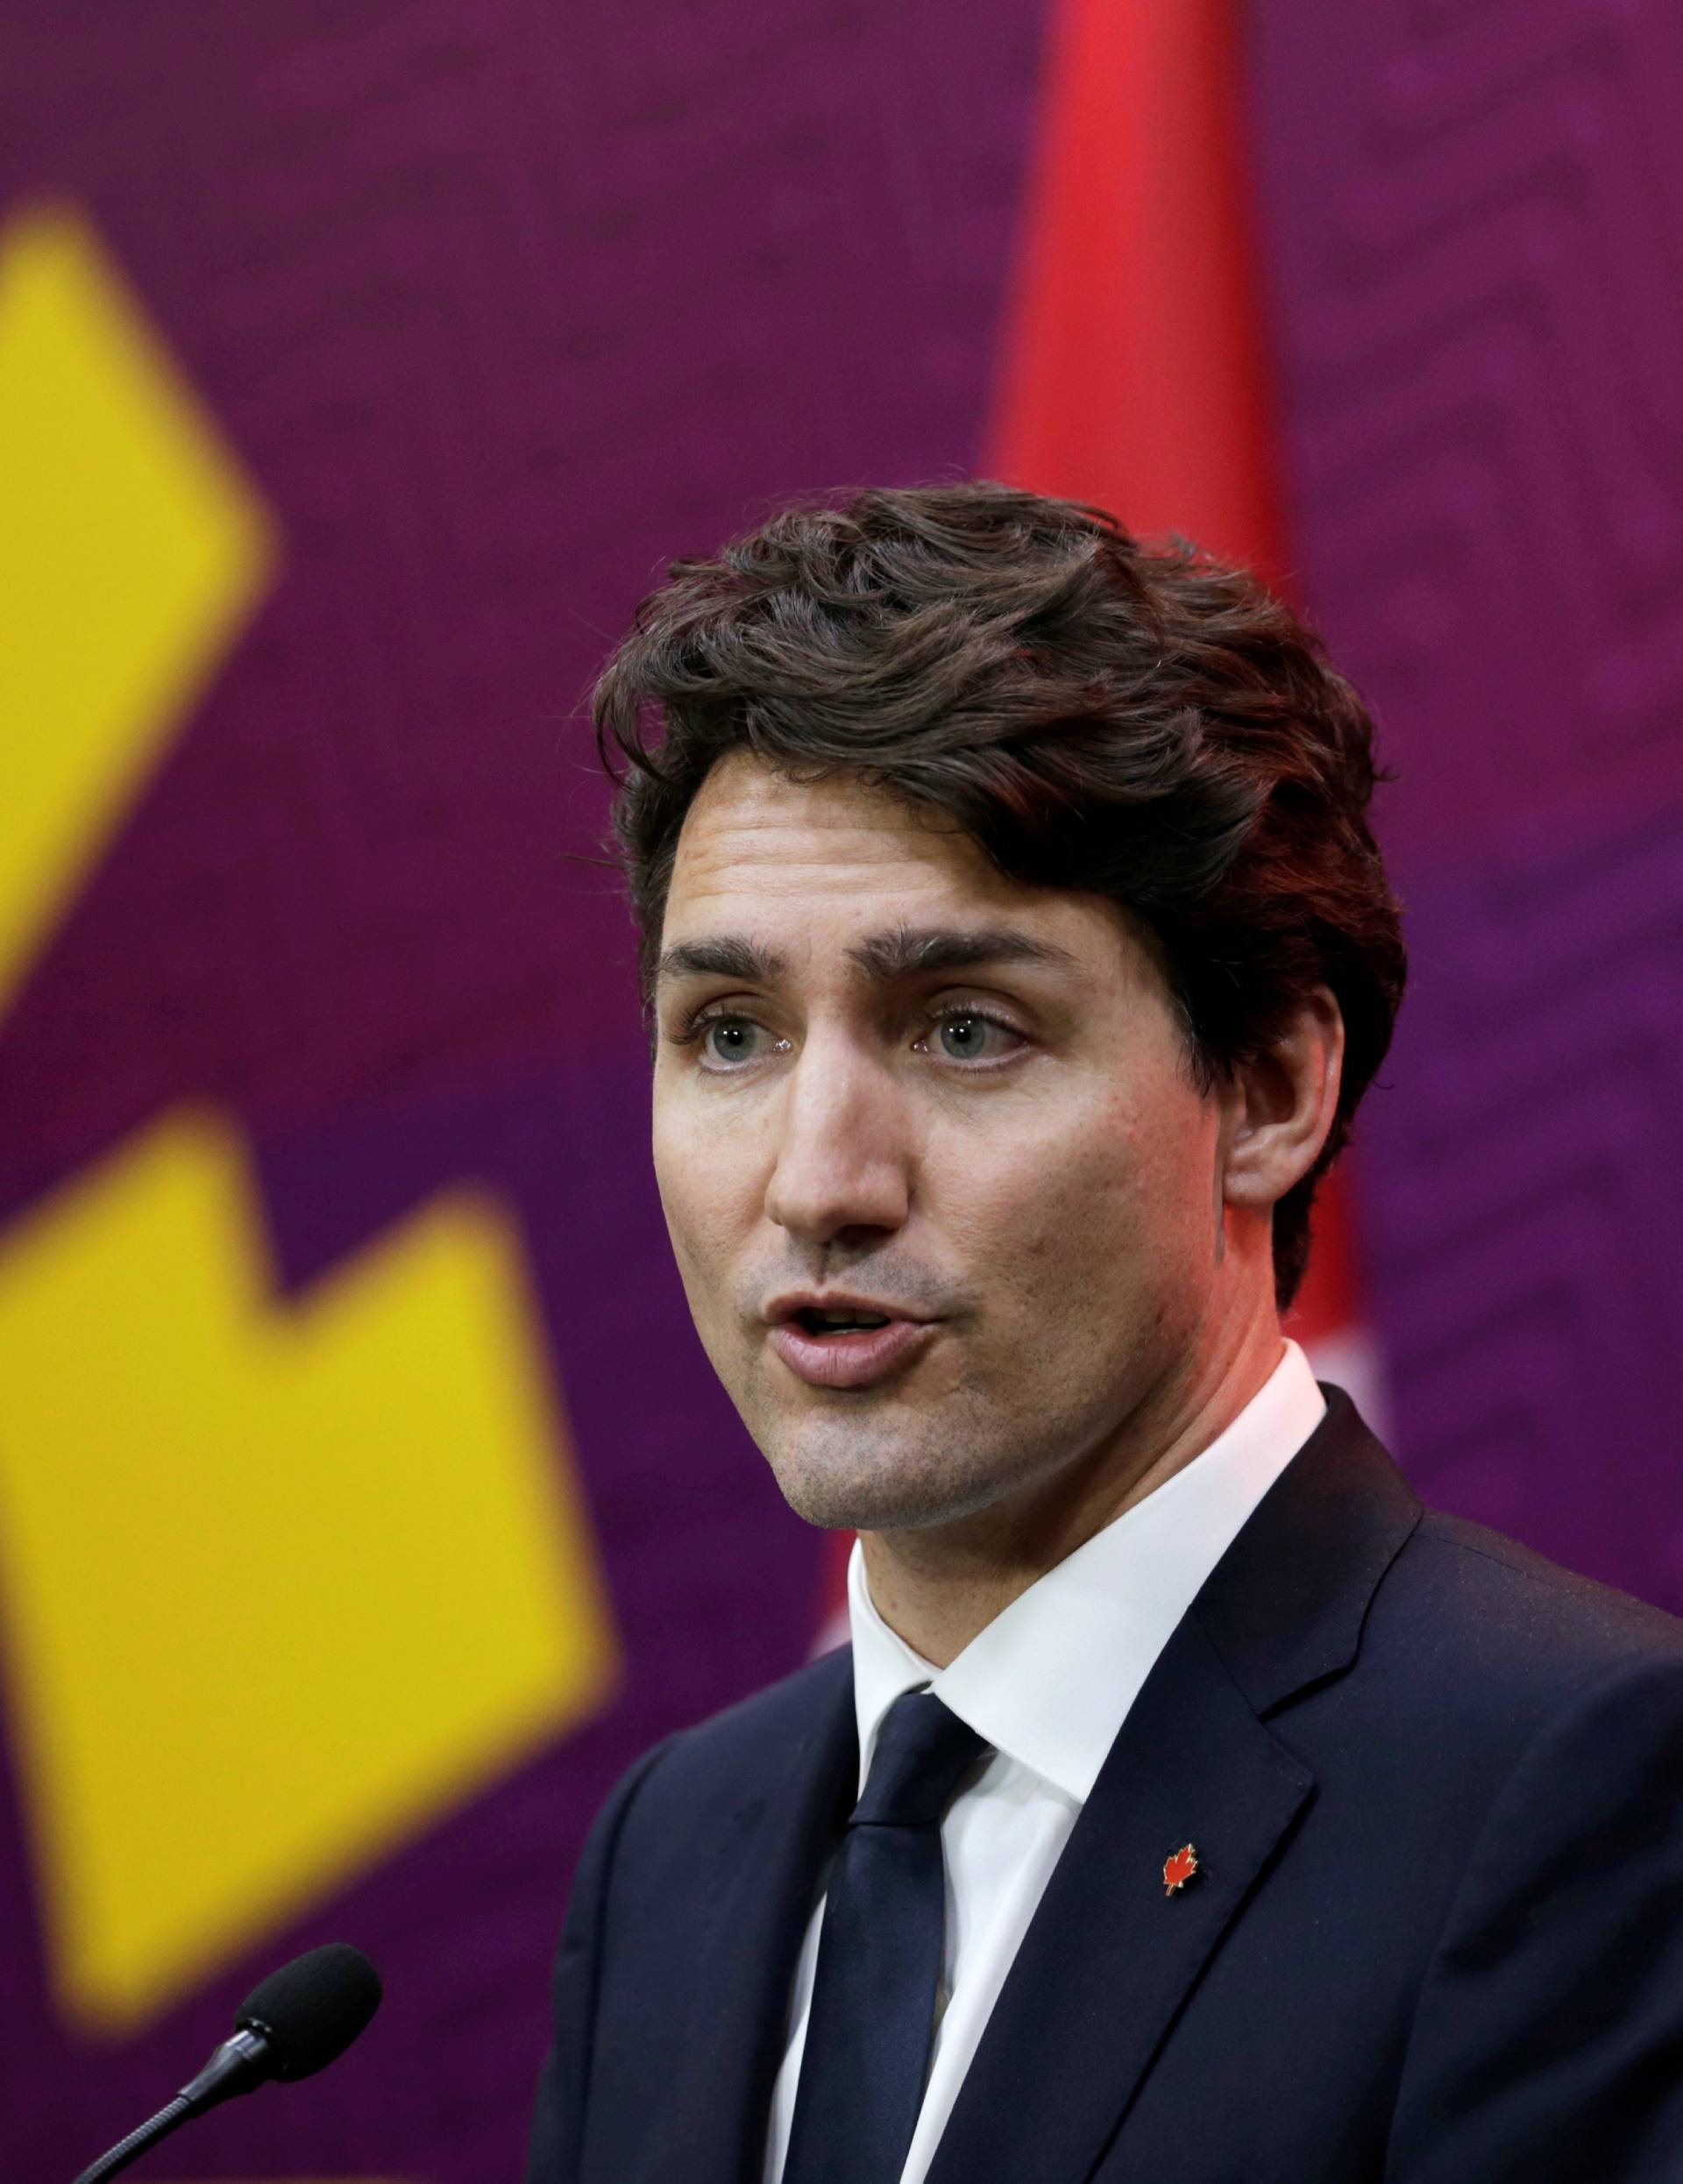 Canada's Prime Minister Justin Trudeau holds a press conference at the conclusion of the APEC Summit in Lima